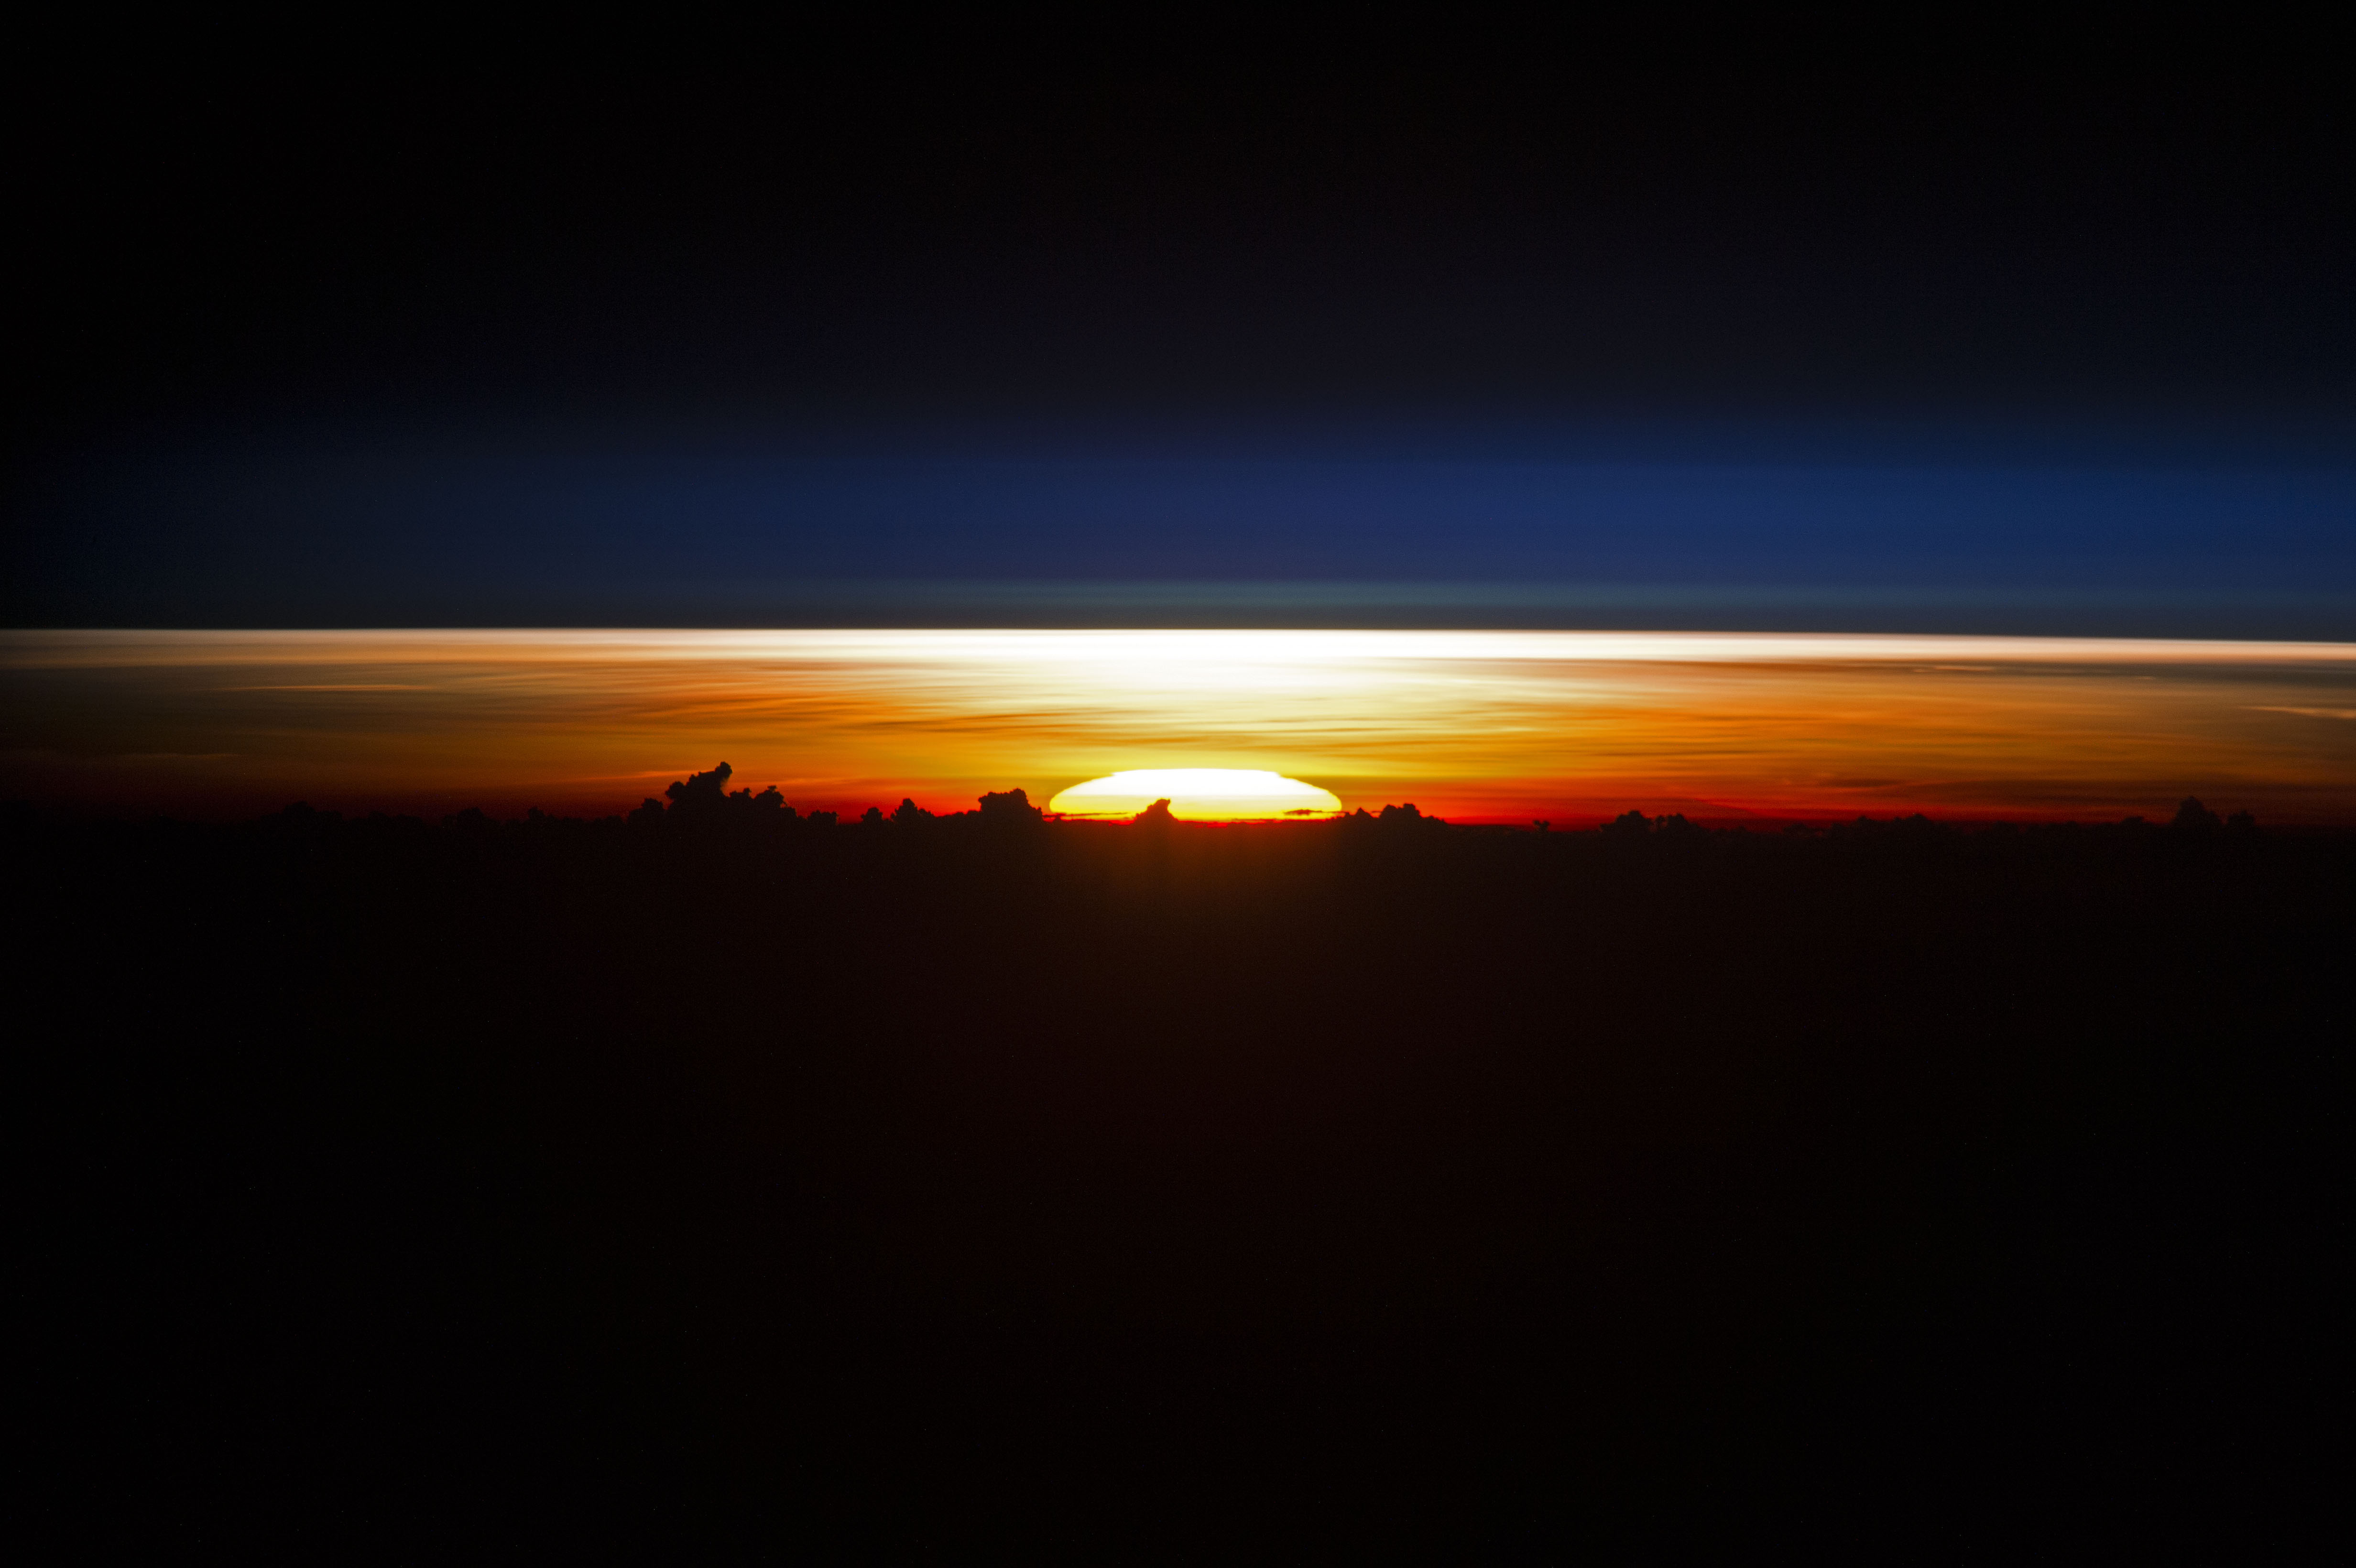  partial disc of the sun just as it began to rise, creating a sheet of light across the horizon. Silhouetted clouds give the sense of a jumbled mountain range. (Nasa)